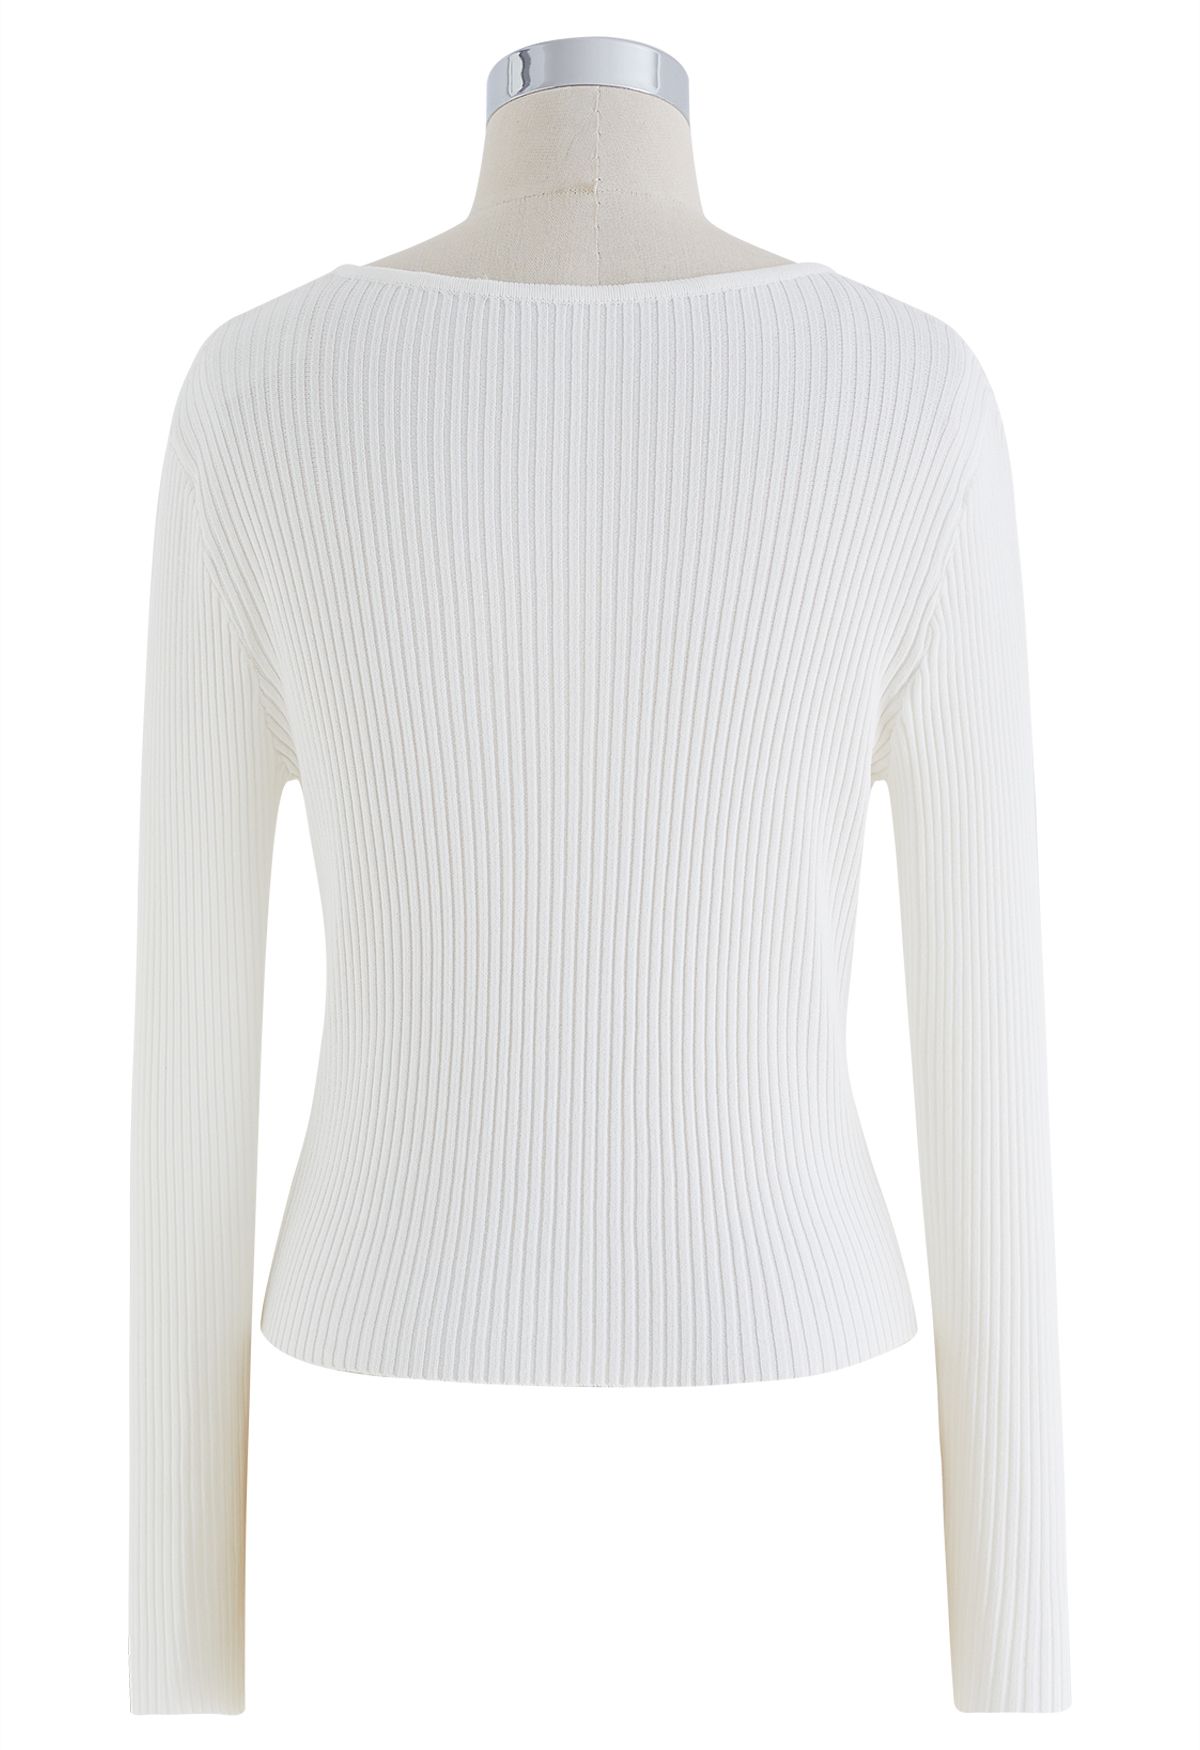 Decorative Pearls Ribbed Knit Top in White